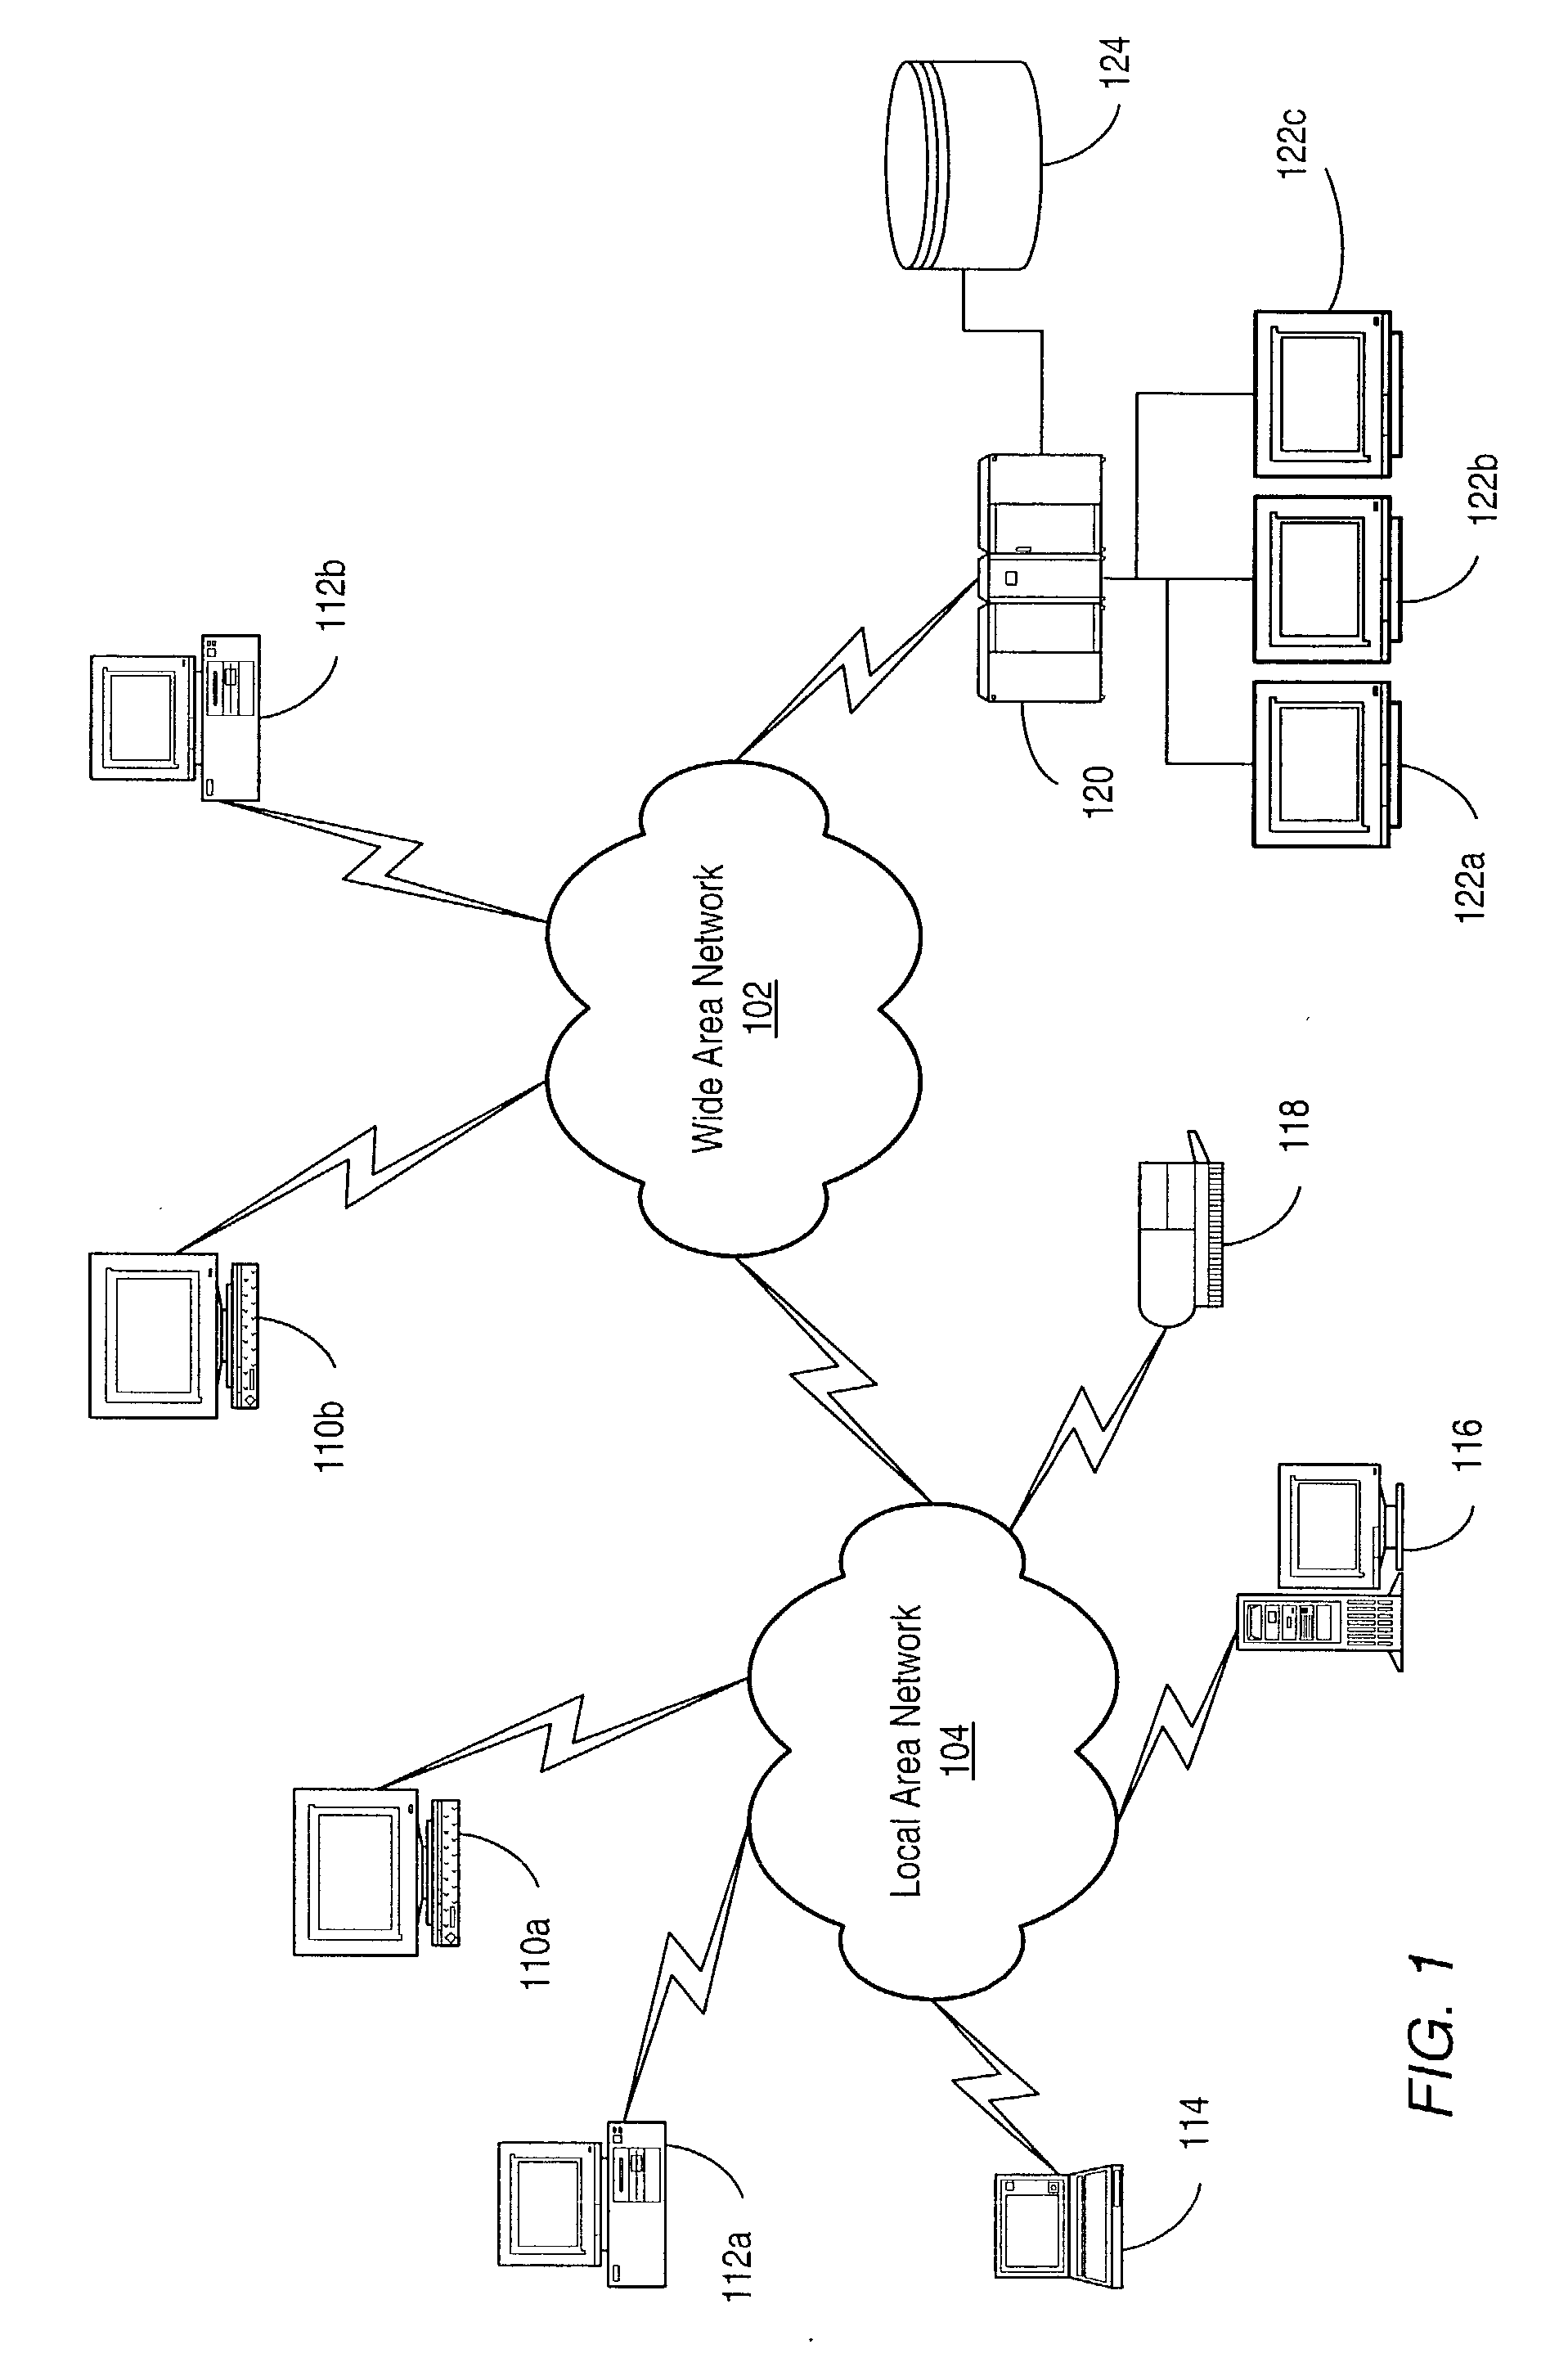 Computerized method and system for determining breach of duty in premises liability for an accident